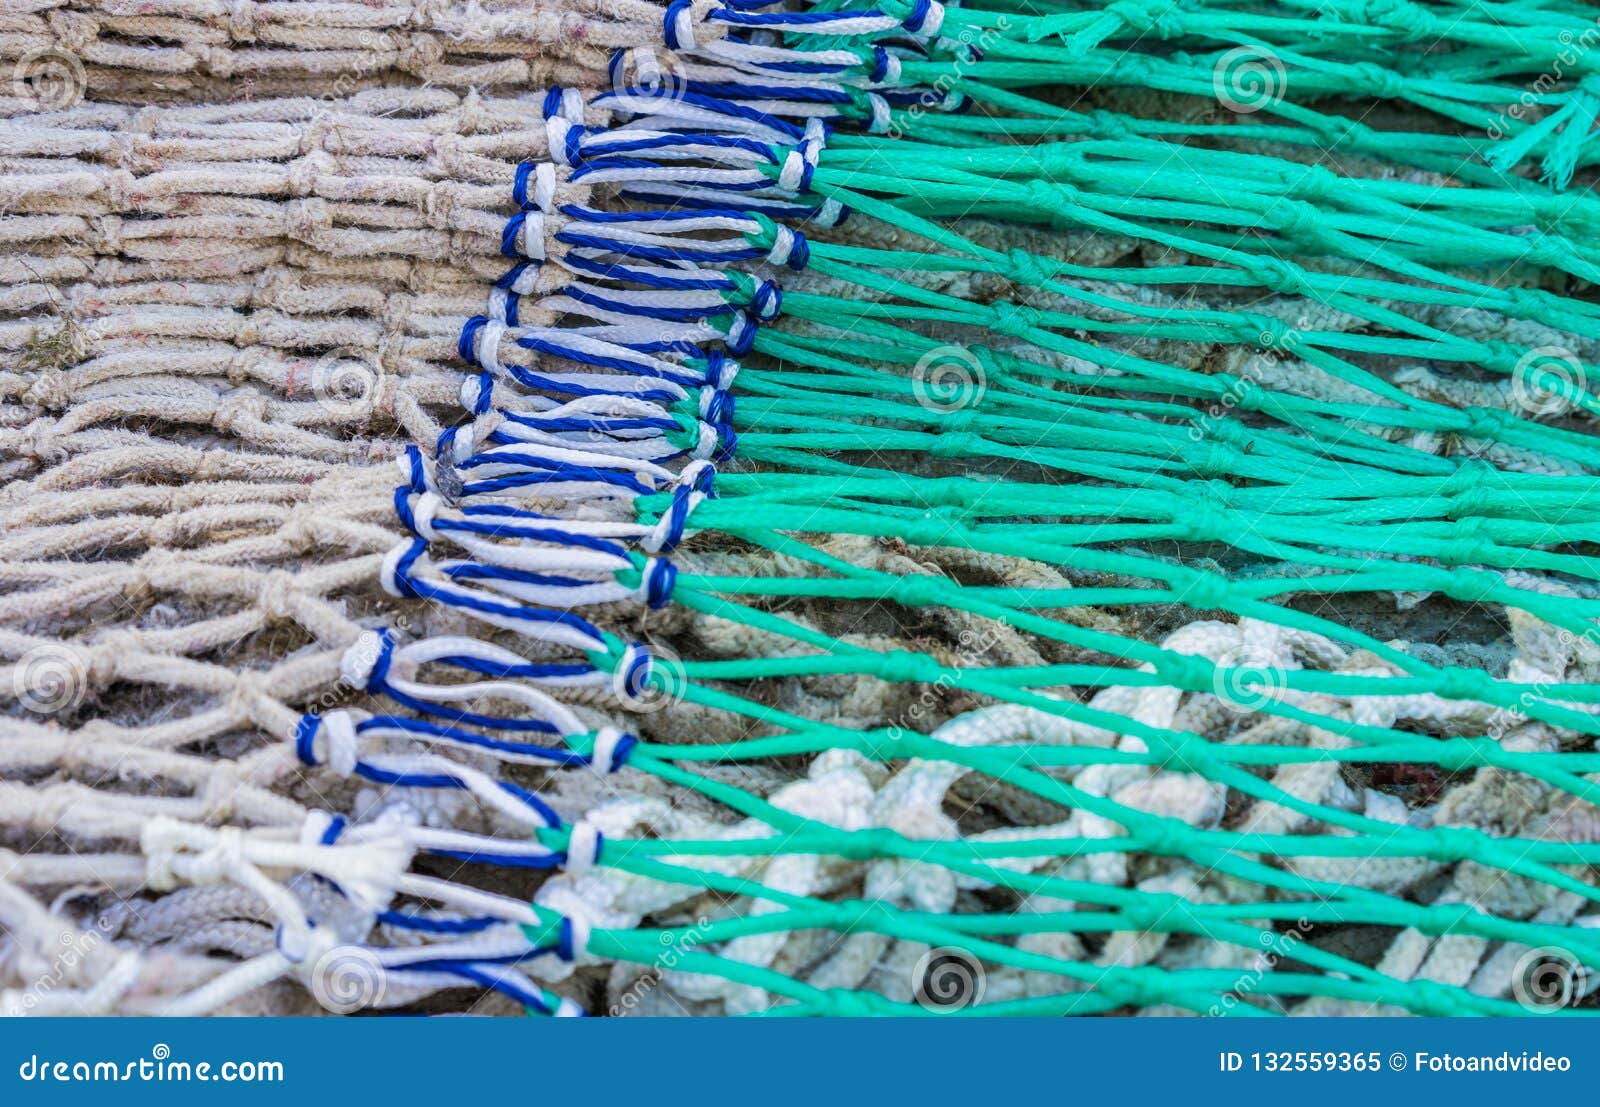 https://thumbs.dreamstime.com/z/knotted-pattern-fishing-net-mesh-close-up-commercial-fish-maritime-background-texture-132559365.jpg